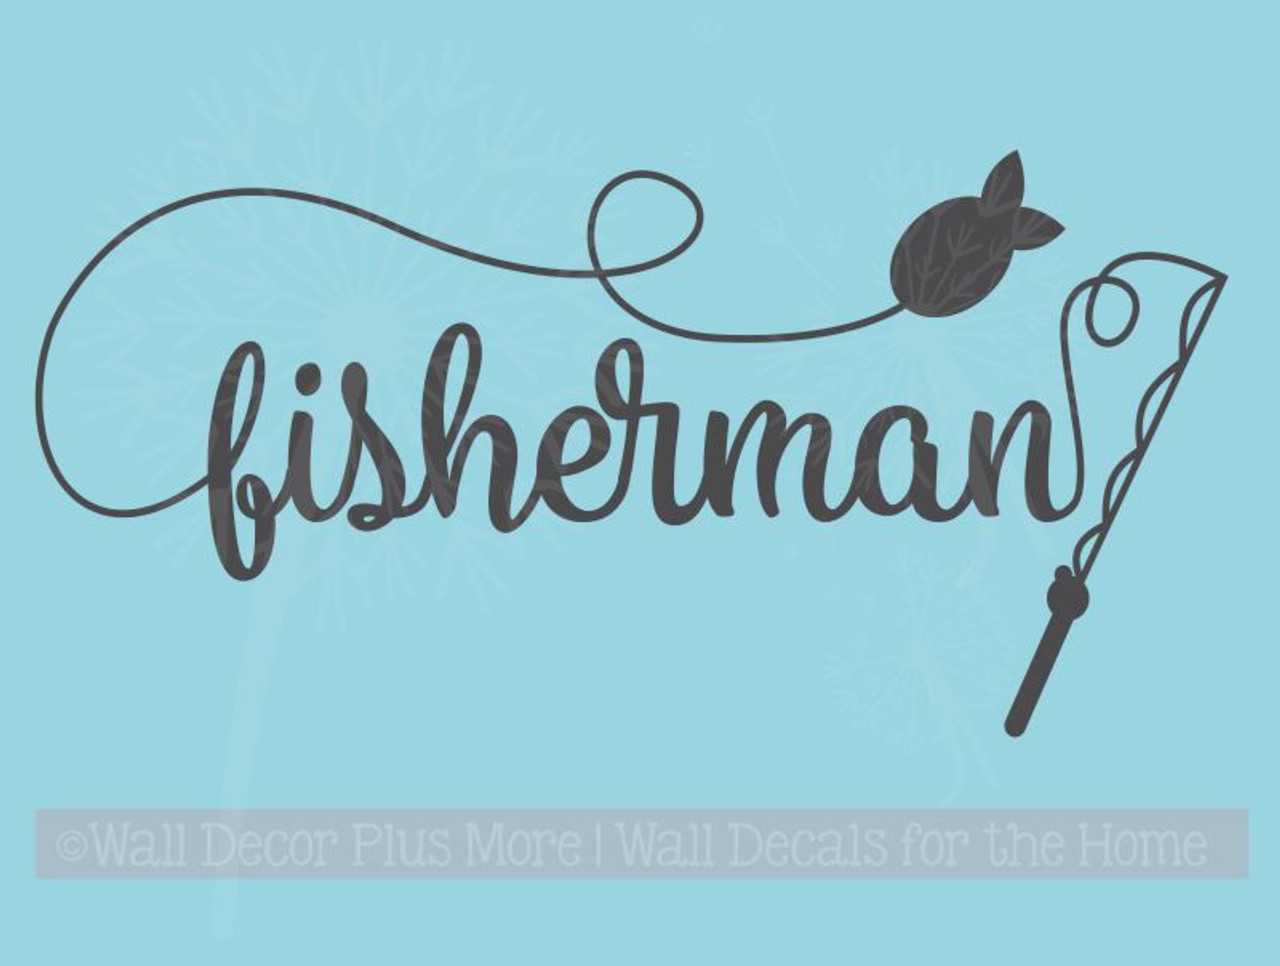 Fisherman Wall Lettering Vinyl Decal Sticker Fishing Pole and Fish on Line